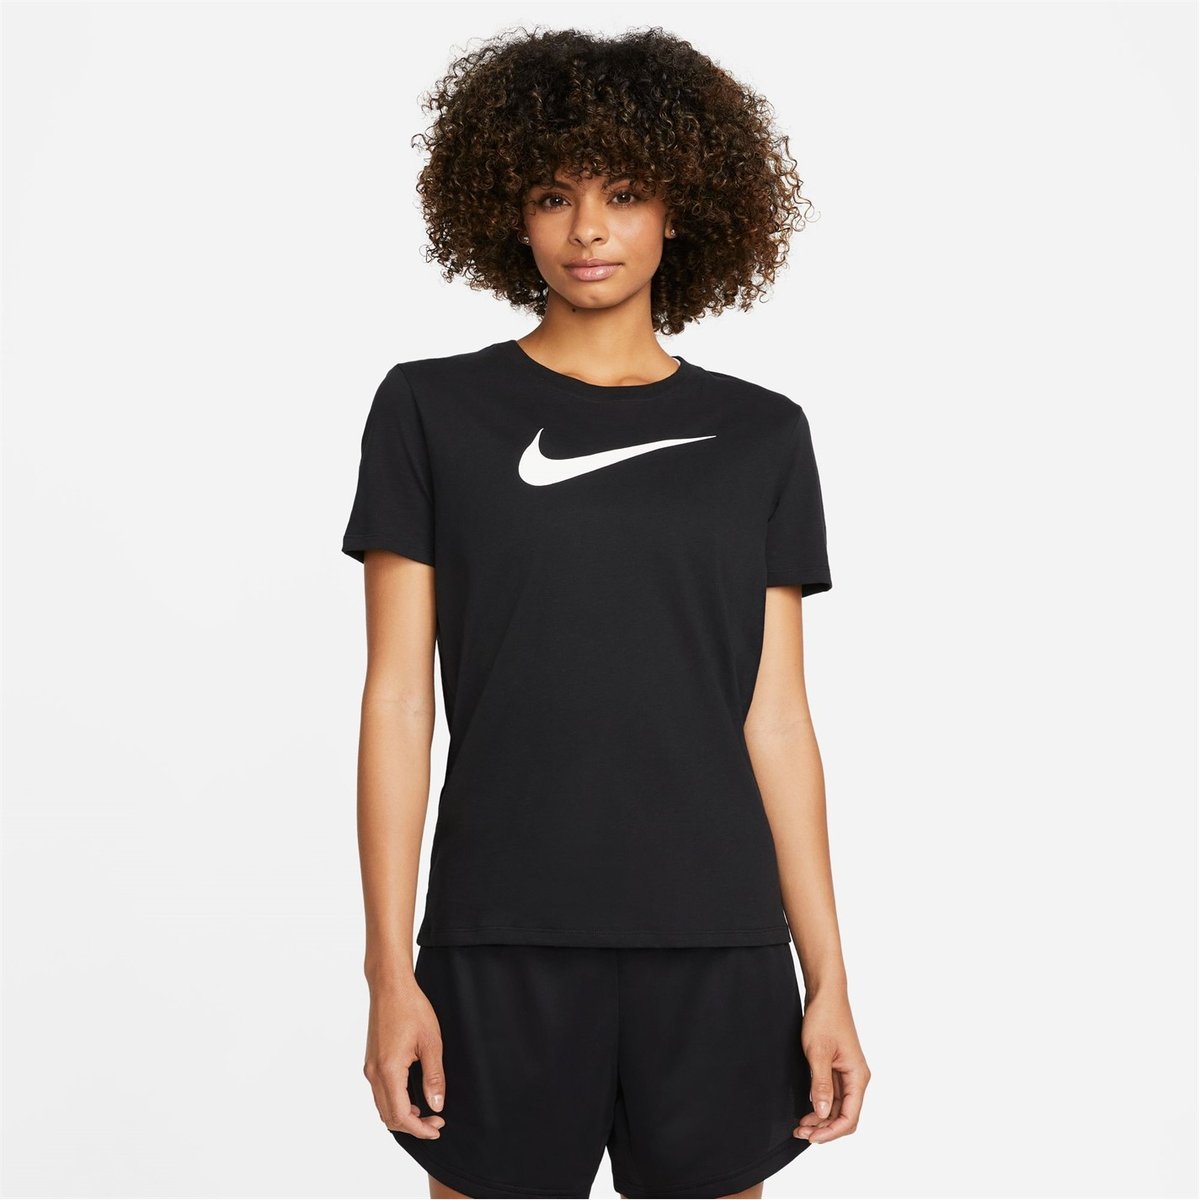 Nike Clothing & Accessories - Lovell Sports page 4